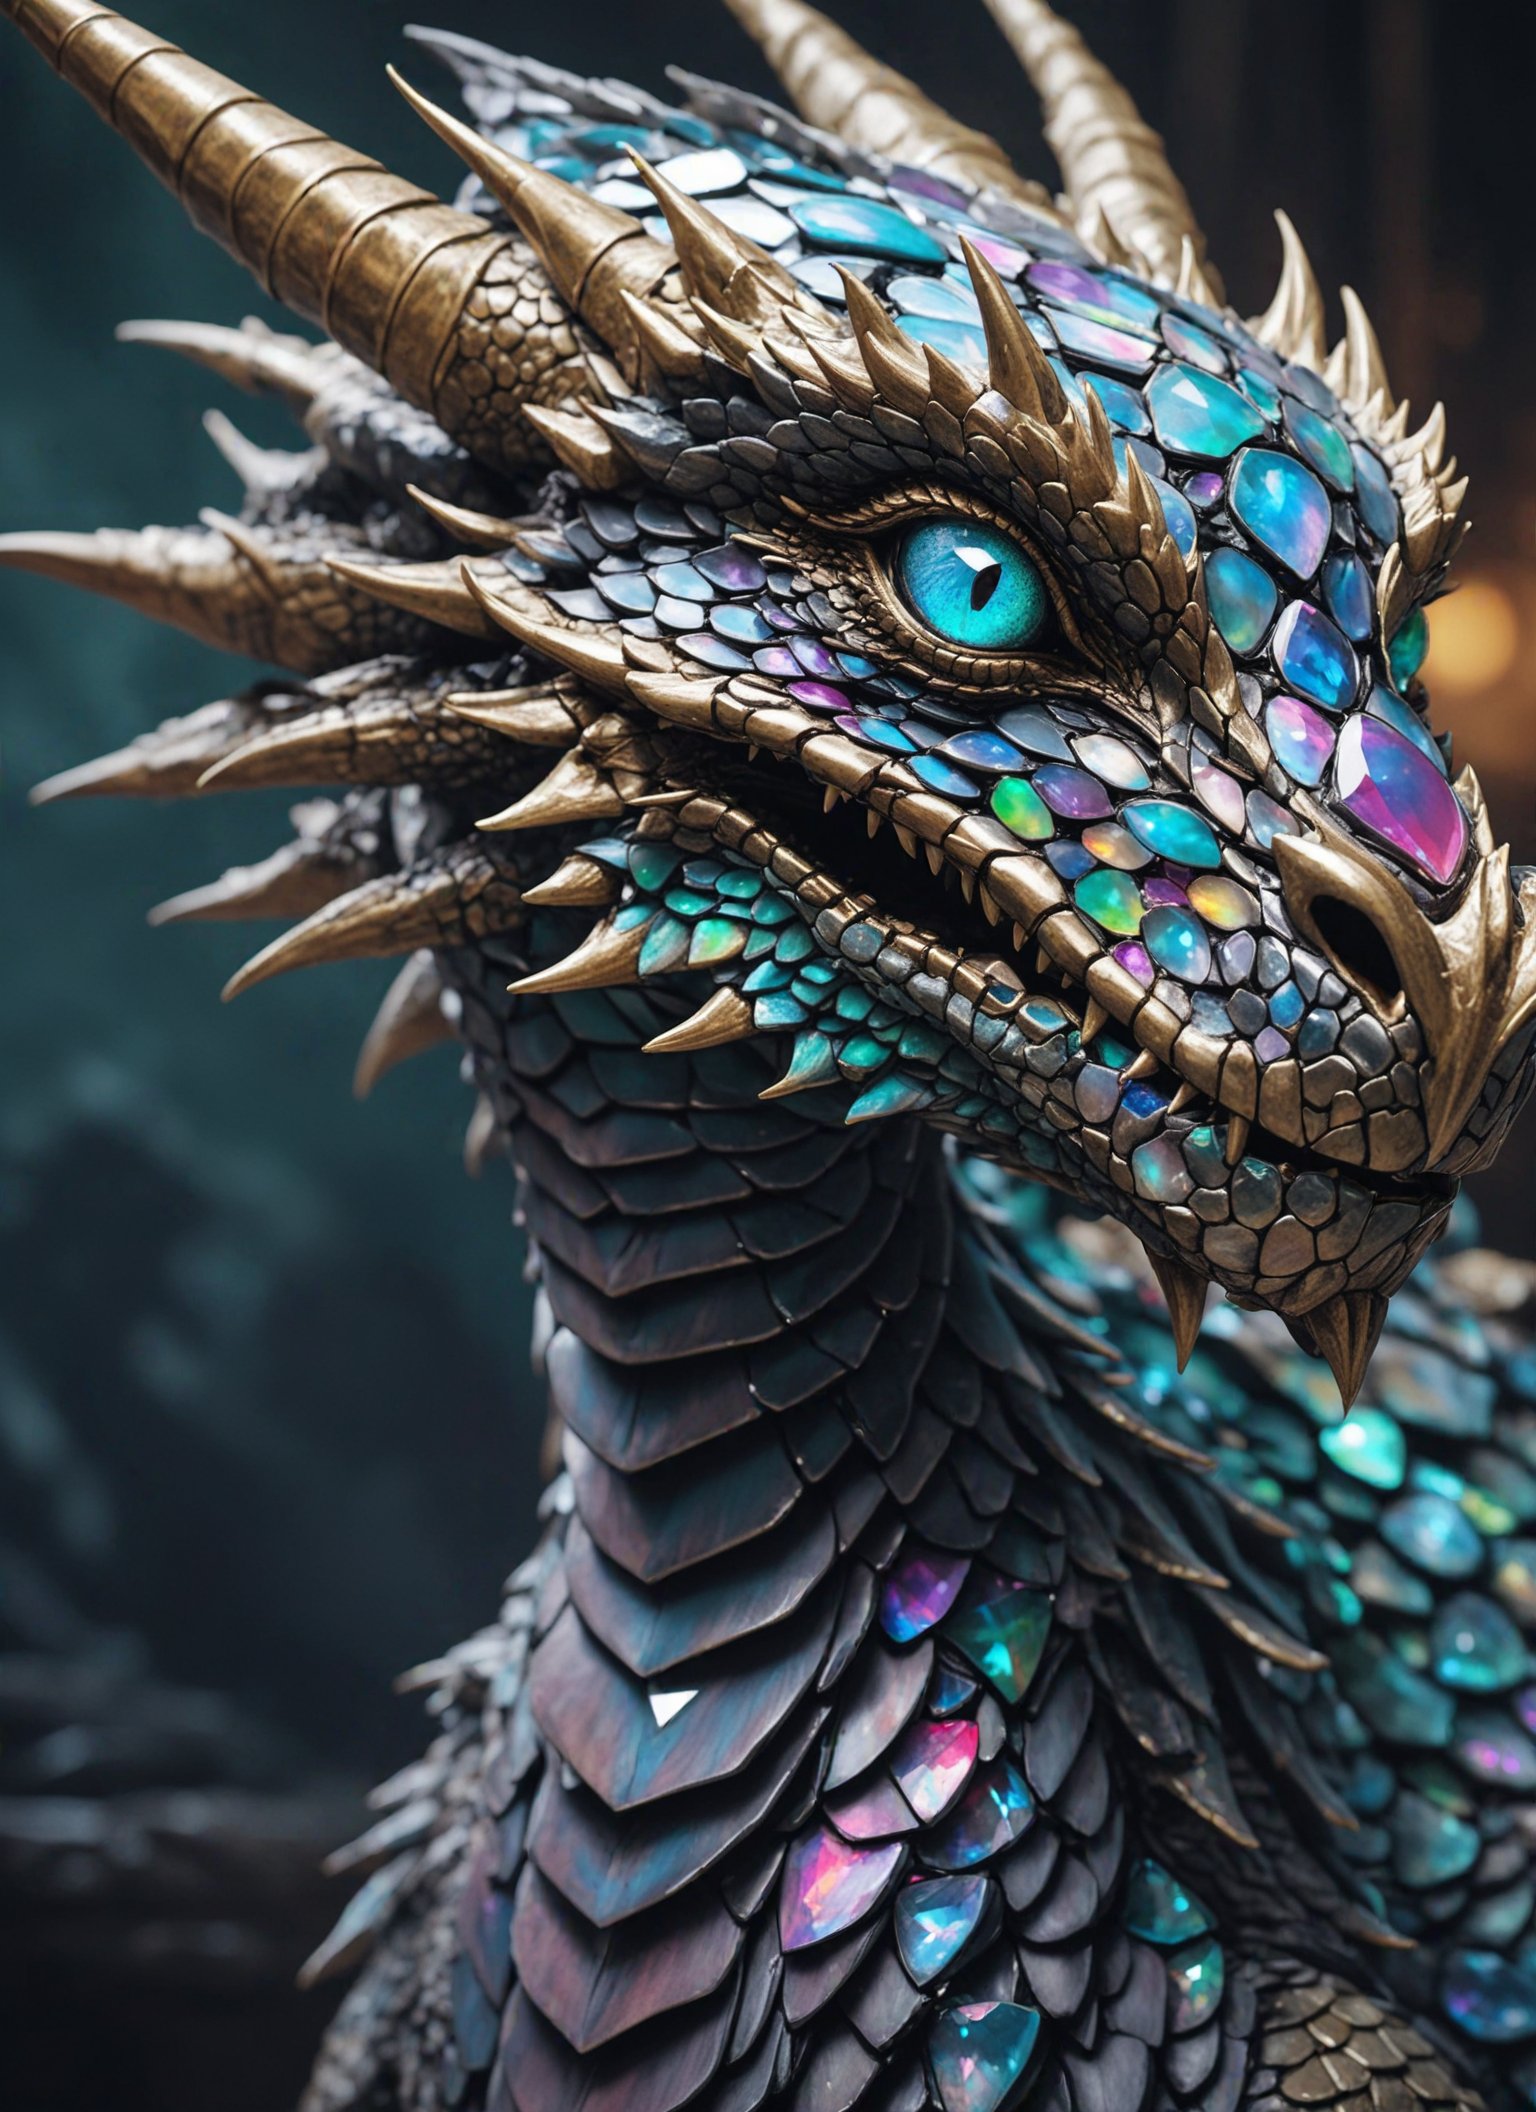 A beautiful portrait photograph of a dragon with diamond and gemstone scales, opal eyes, cinematic, gem, diamond, crystal, fantasy art, hyperdetailed photograph, shiny scales, 8k resolution